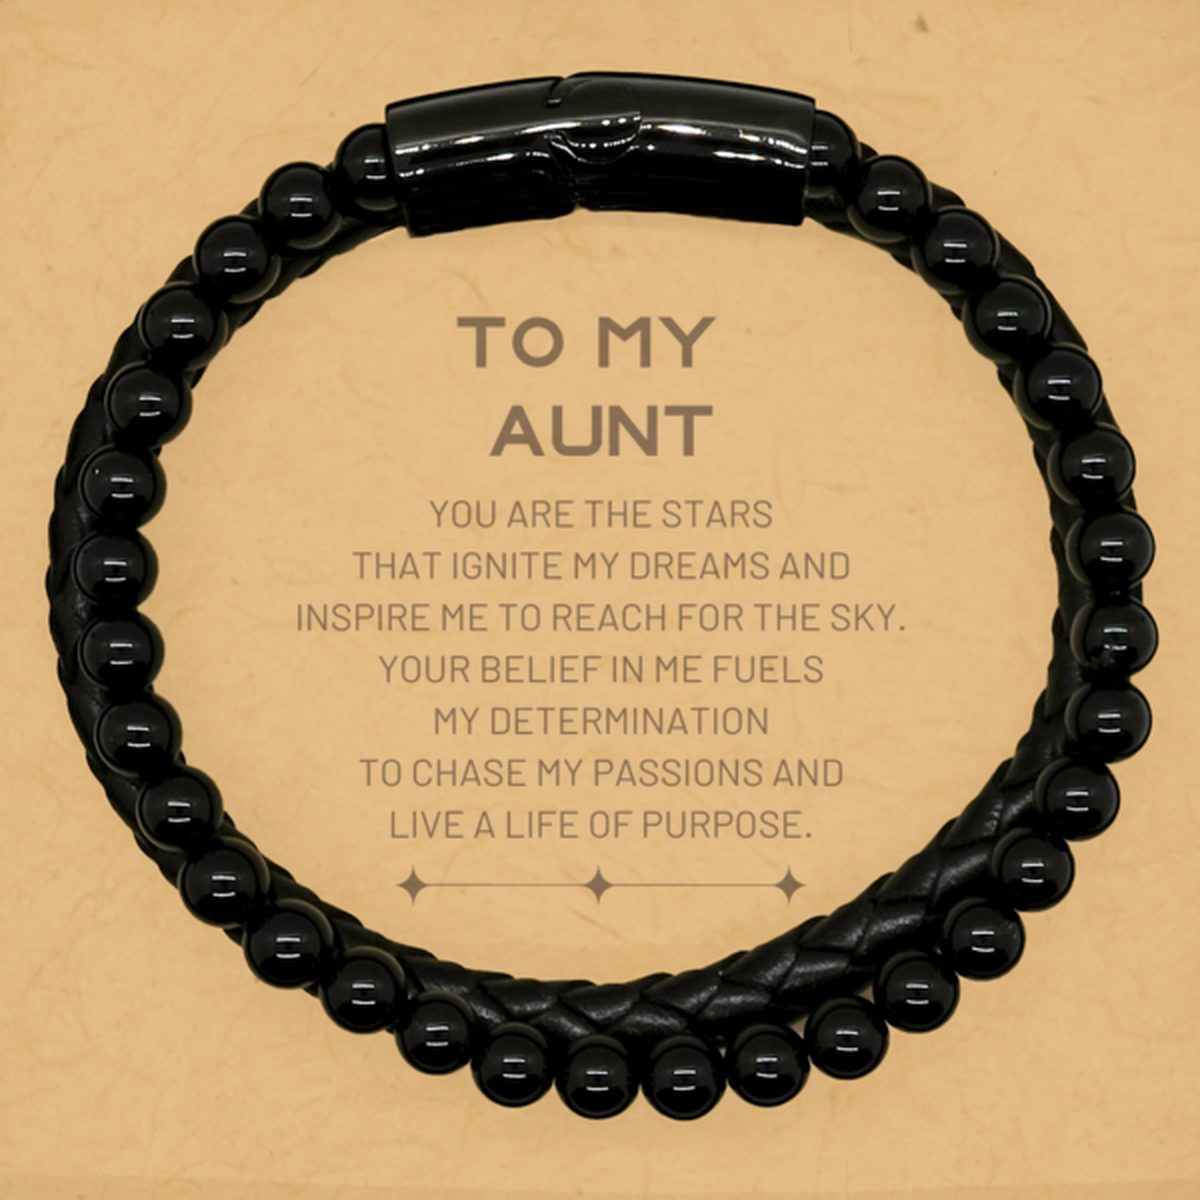 To My Aunt Stone Leather Bracelets, You are the stars that ignite my dreams and inspire me to reach for the sky, Birthday Unique Gifts For Aunt, Thank You Gifts For Aunt